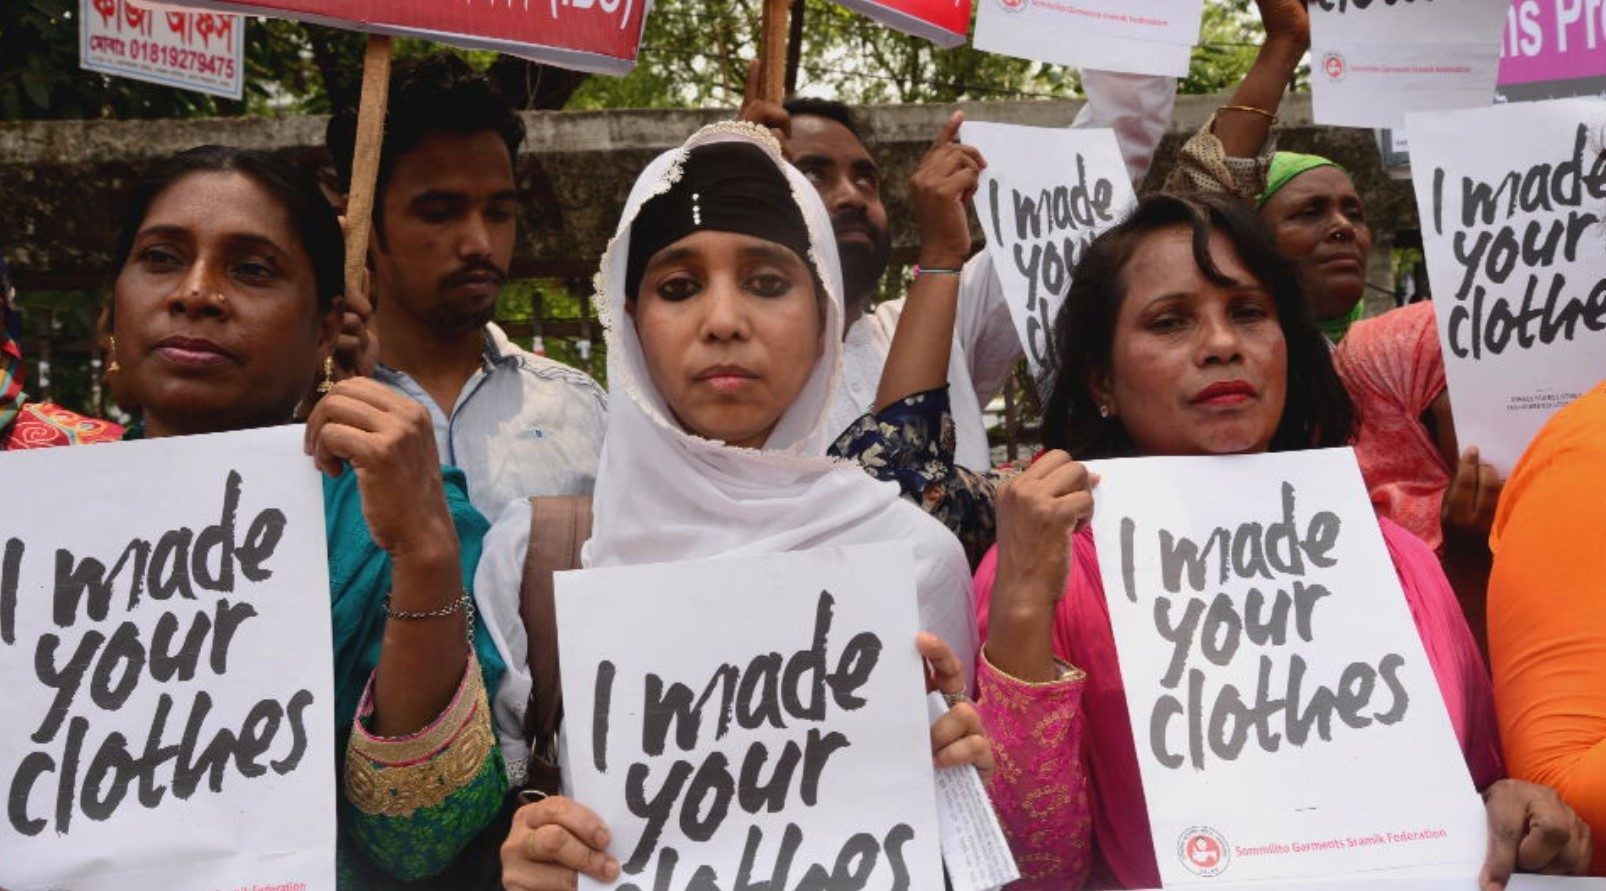 Garment workers continue to be exploited at fast fashion factories in developing countries 